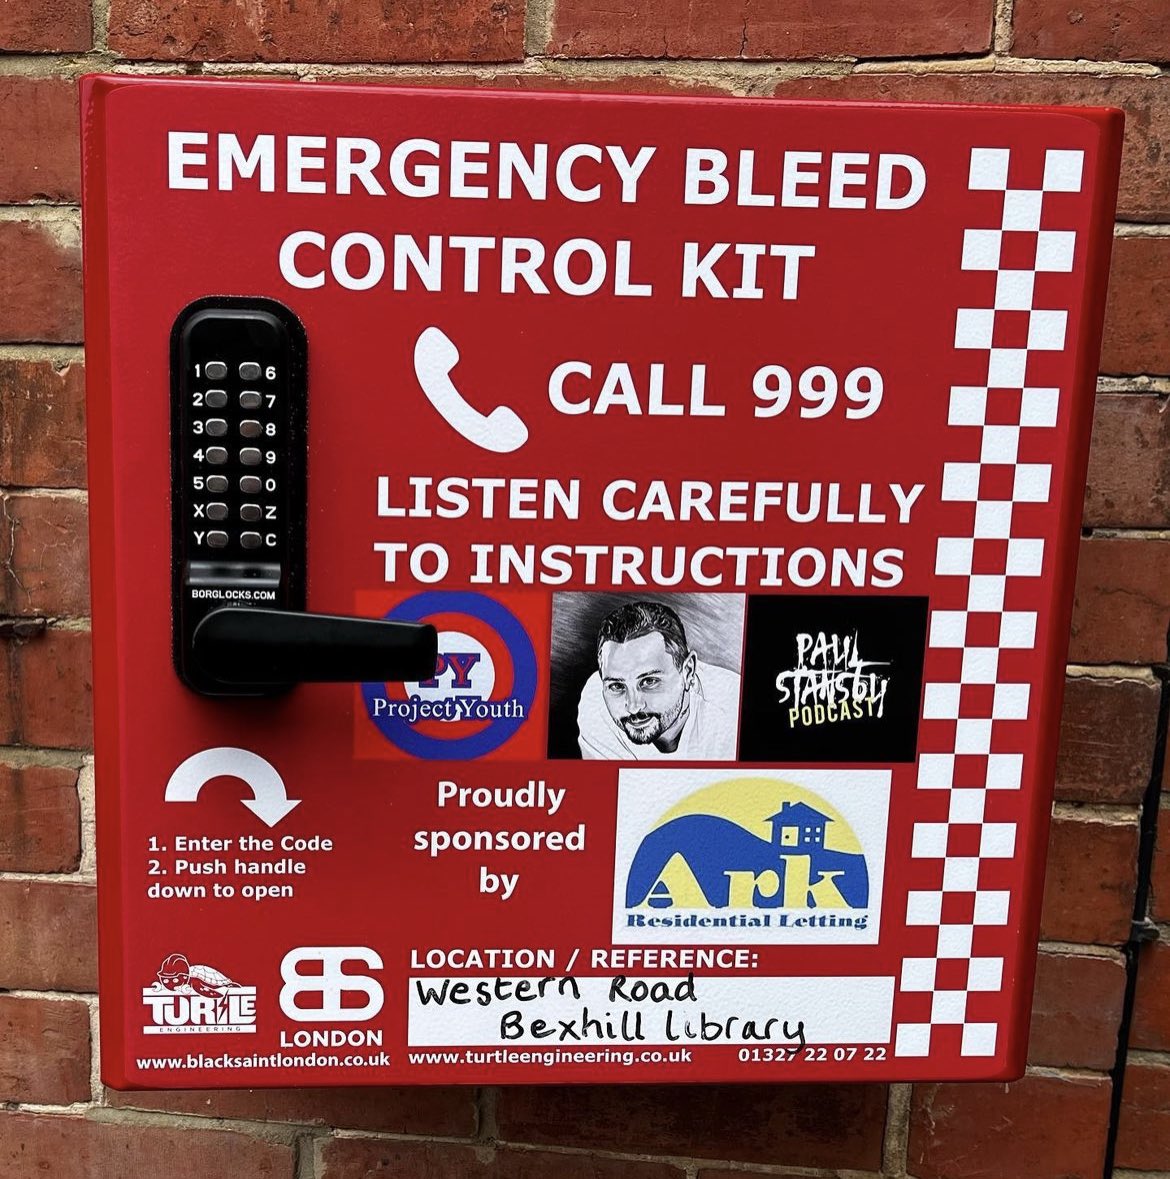 DID YOU KNOW? In #sussex there are 4 Bleed Cabinets. These are all accessible 24/7 for ANY #emergency relating to a Catastrophic Bleed 🩸 Locations: #Hastings #Bexhill #Worthing #Crawley #savealife #stopthebleed #bleedcontrolkit